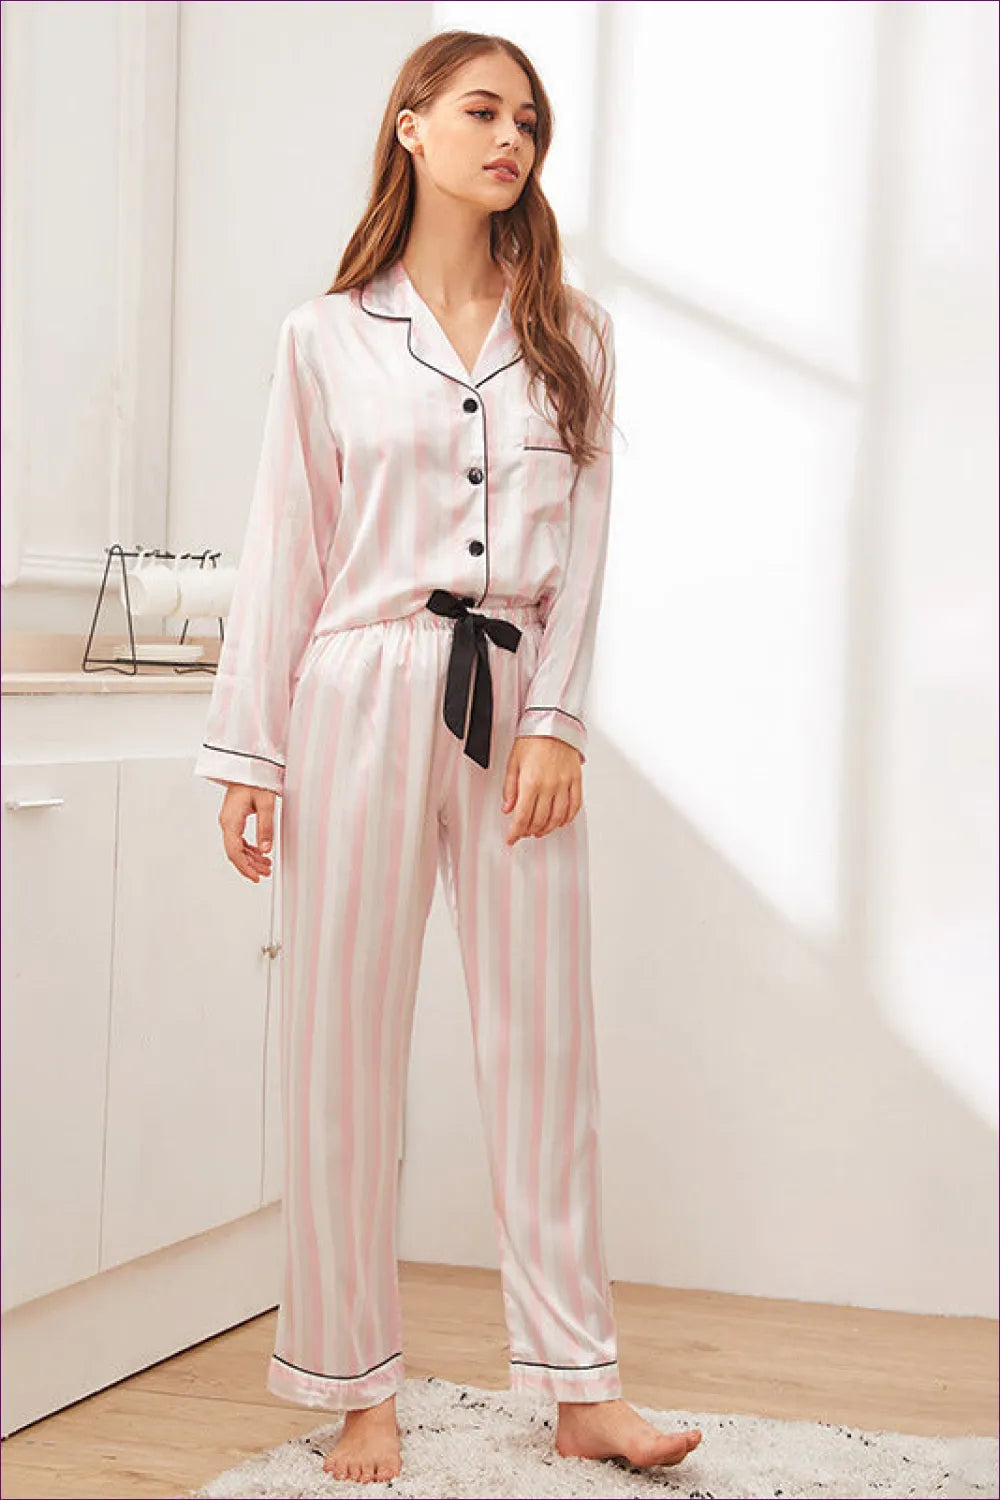 Make a Fashion Statement At Bedtime With Our Satin Stripe Long Sleeve Bow Tie Pyjama Set. Soft Satin, Classic